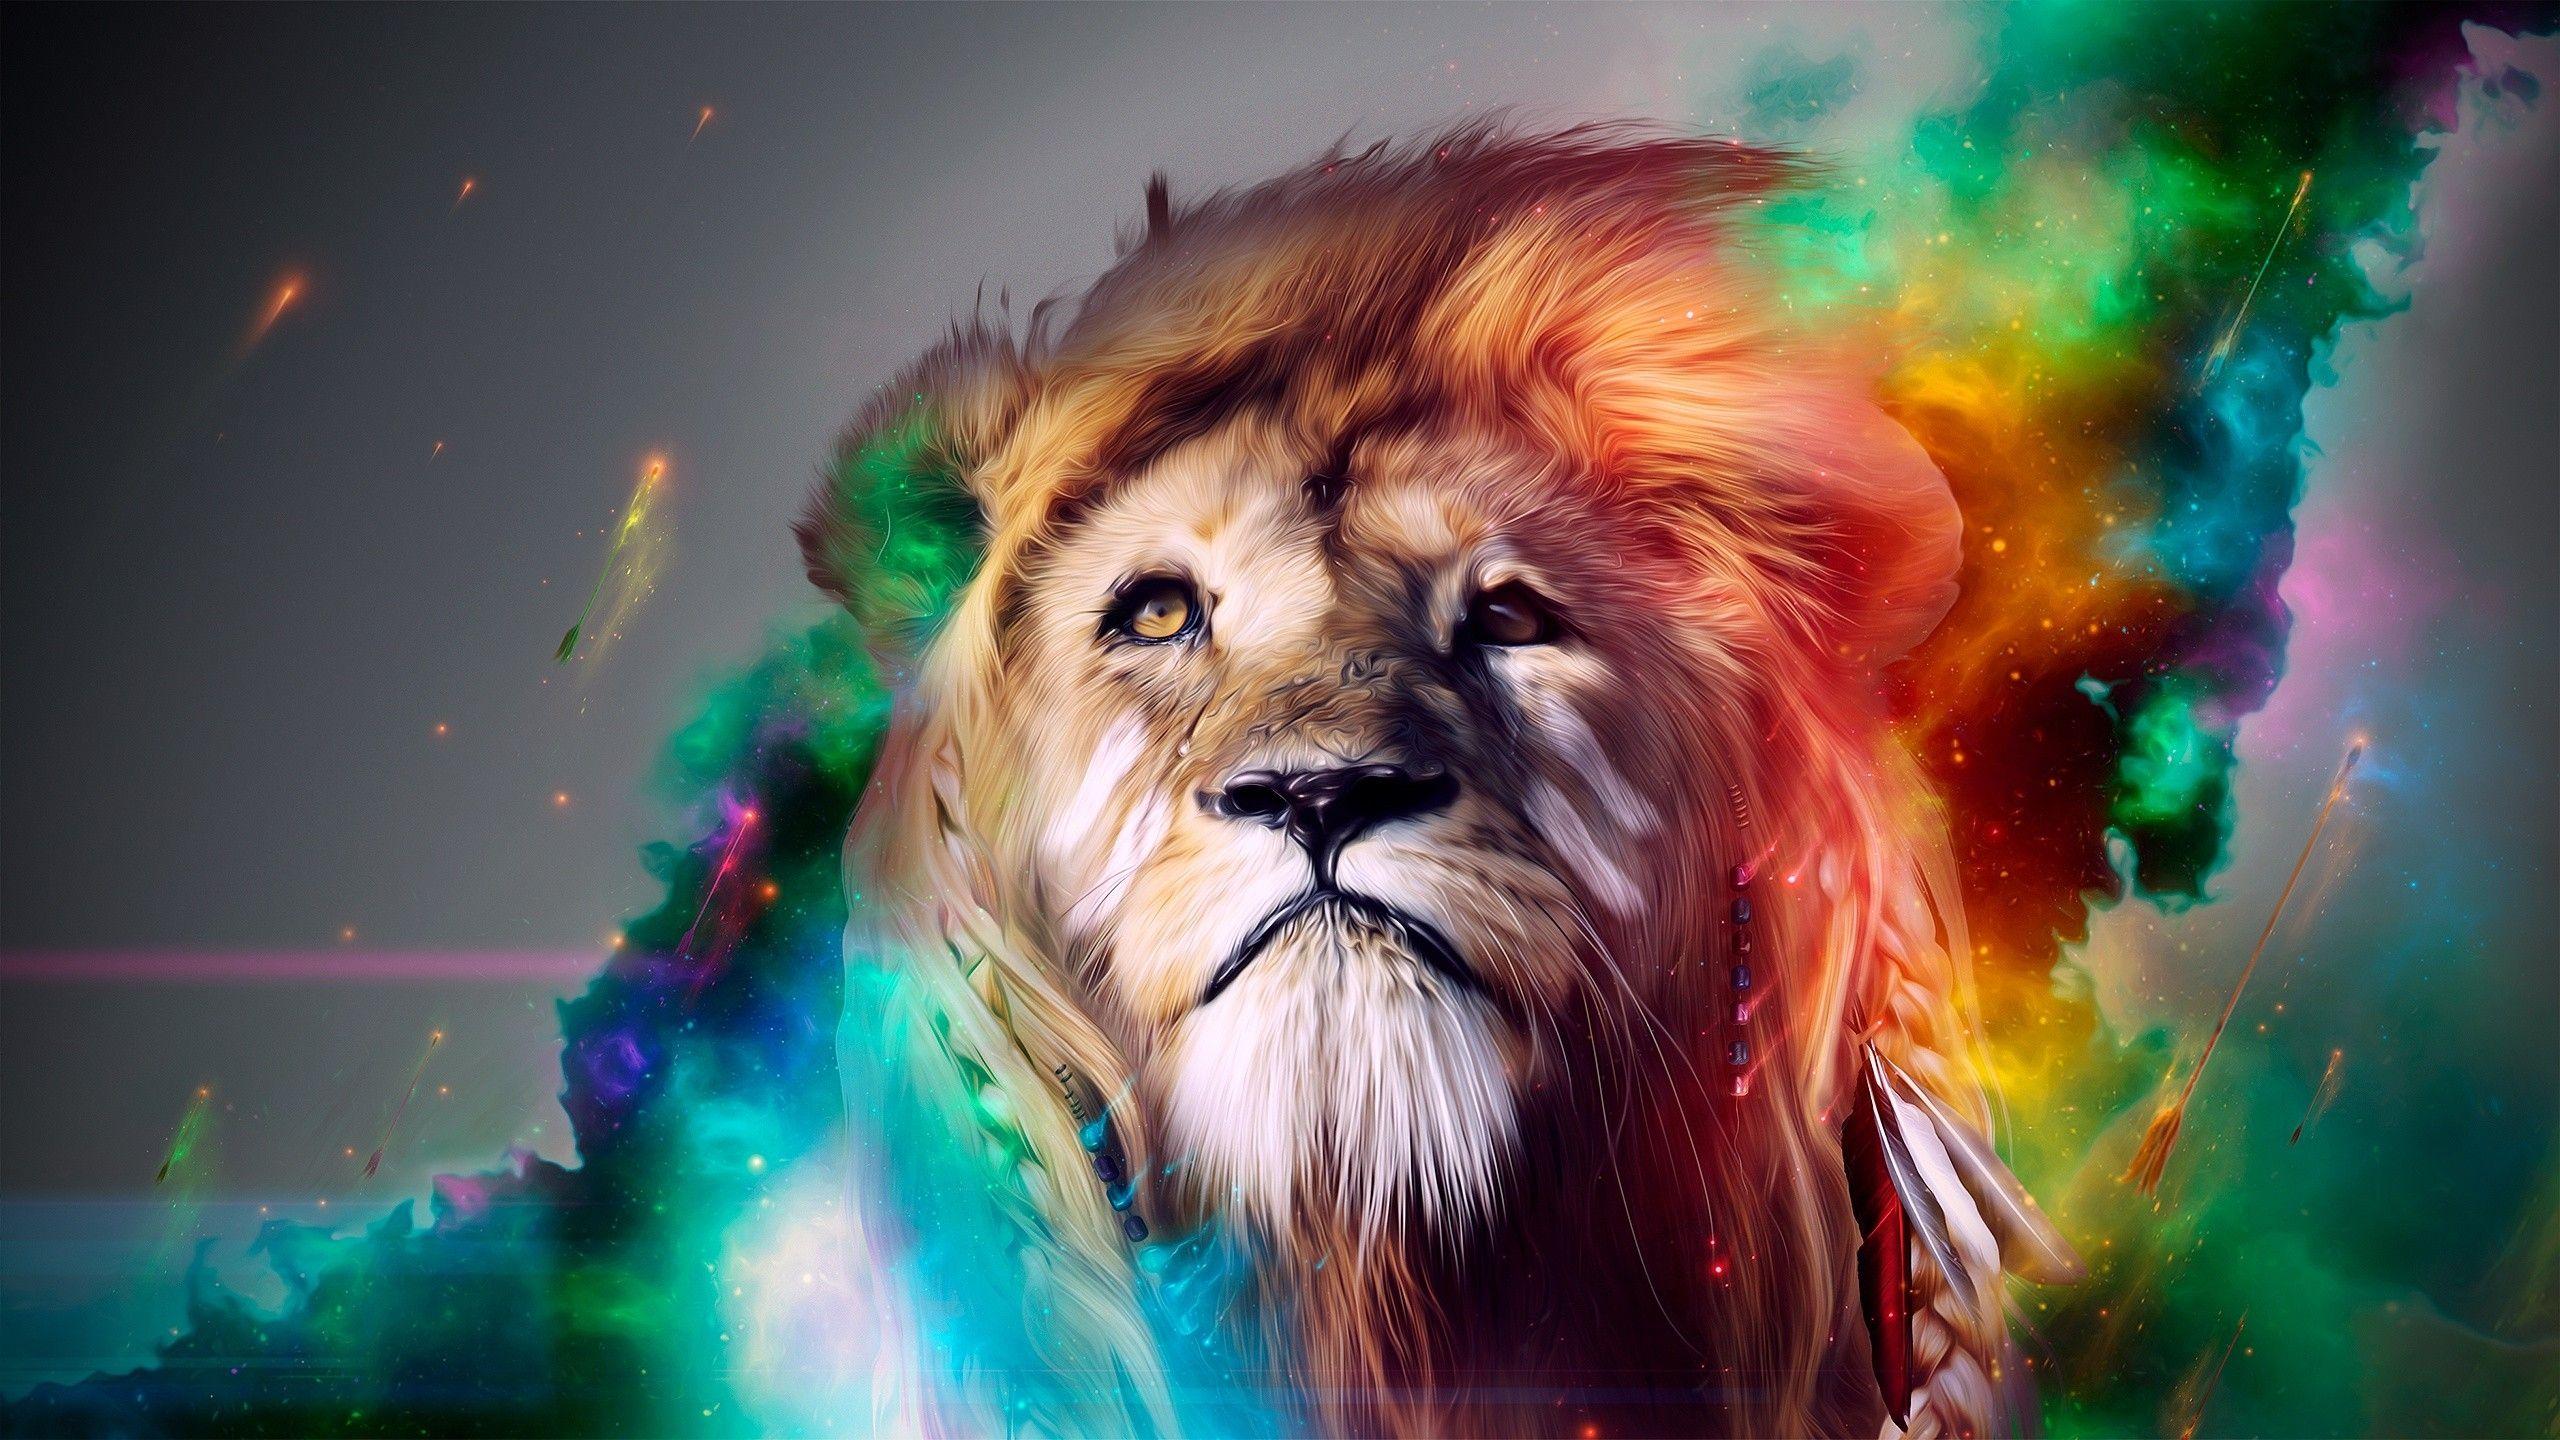 Wallpaper Lion, Big cat, Face, Smoke, Colored HD, Picture, Image